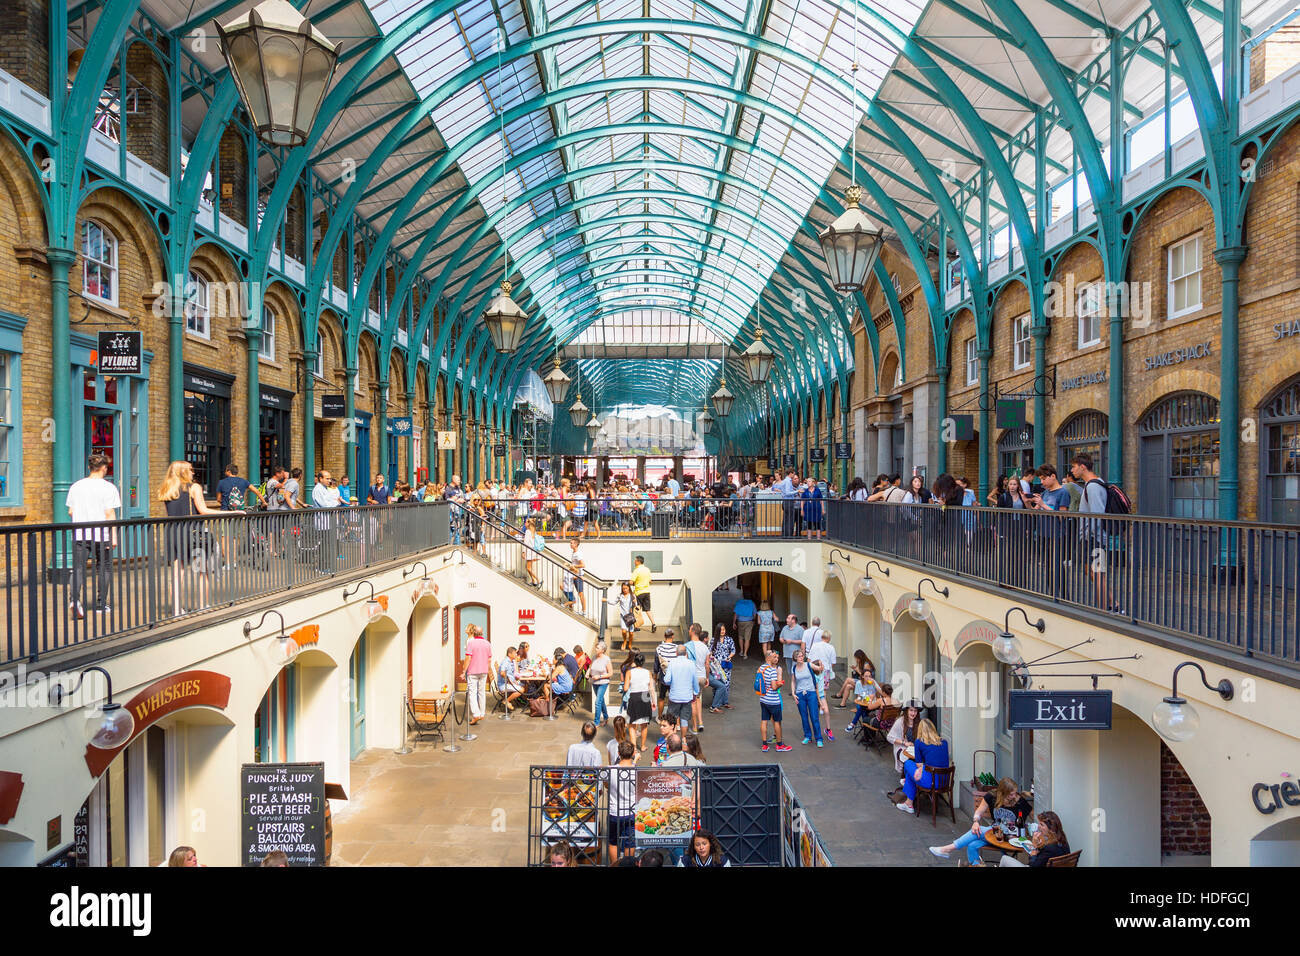 LONDON - Tourists visit the Covent Garden Market August 13, 2016 in London. One of the main London attractions, Stock Photo